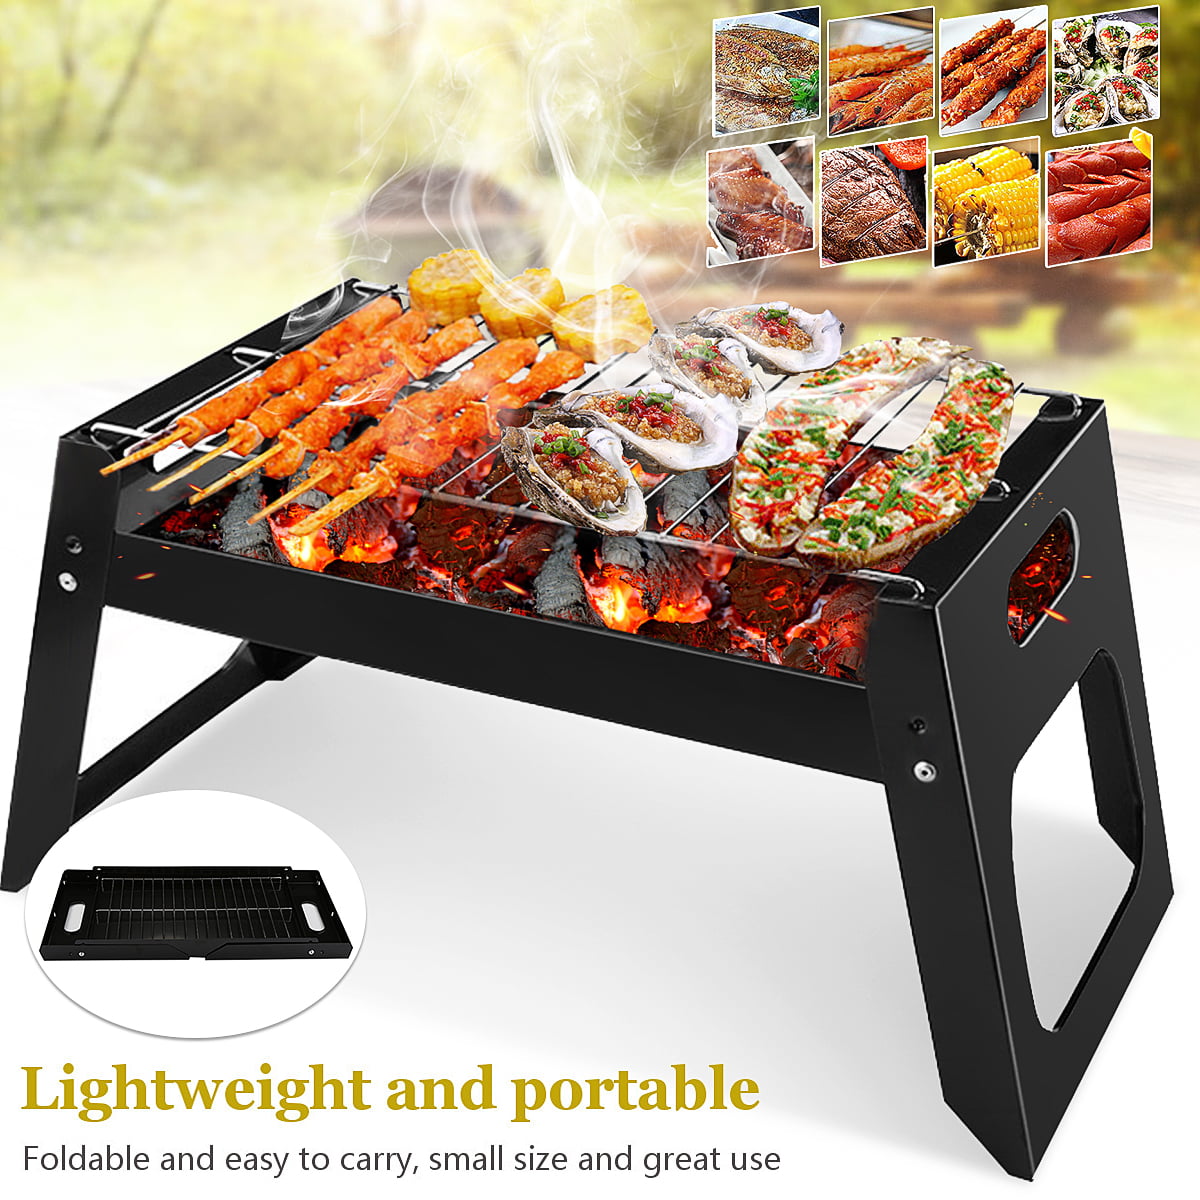 Camping and Picnic Green Charcoal Grill Mini Portable BBQ Grill Foldable Barbecue Grills for Outdoor Cooking 